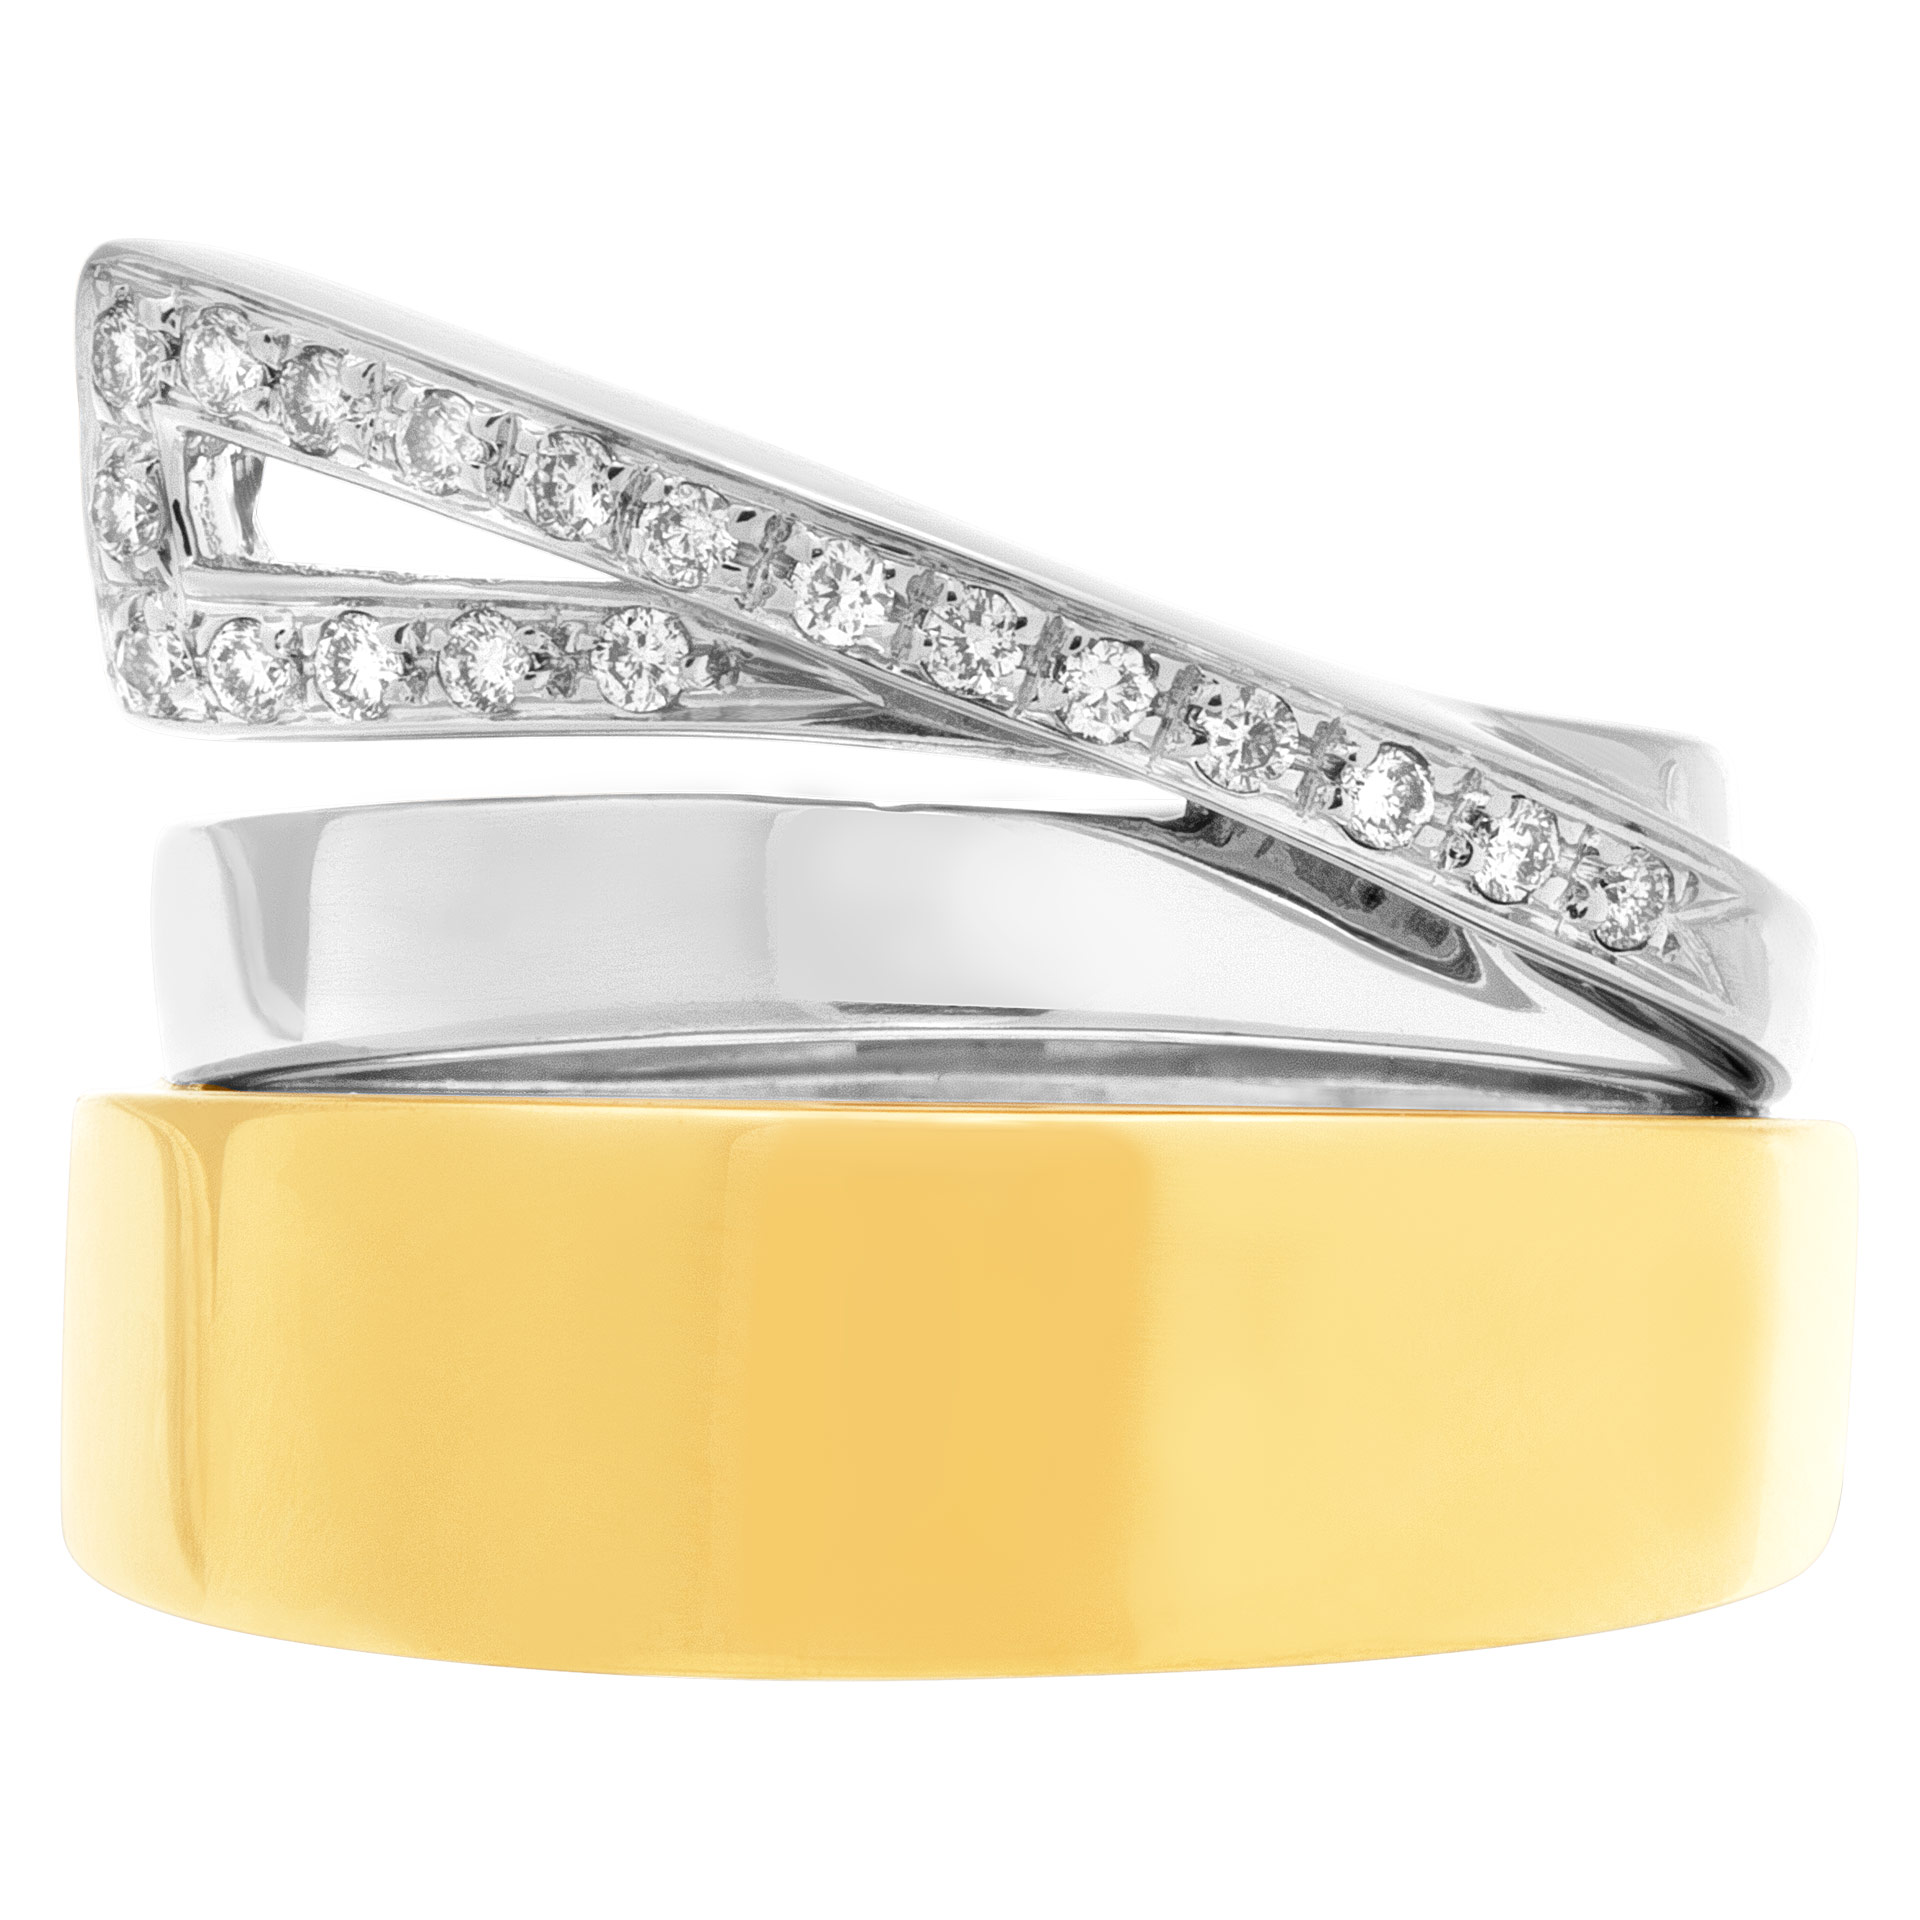  Stack ing in 18k white and yellow gold with diamond swirl image 1